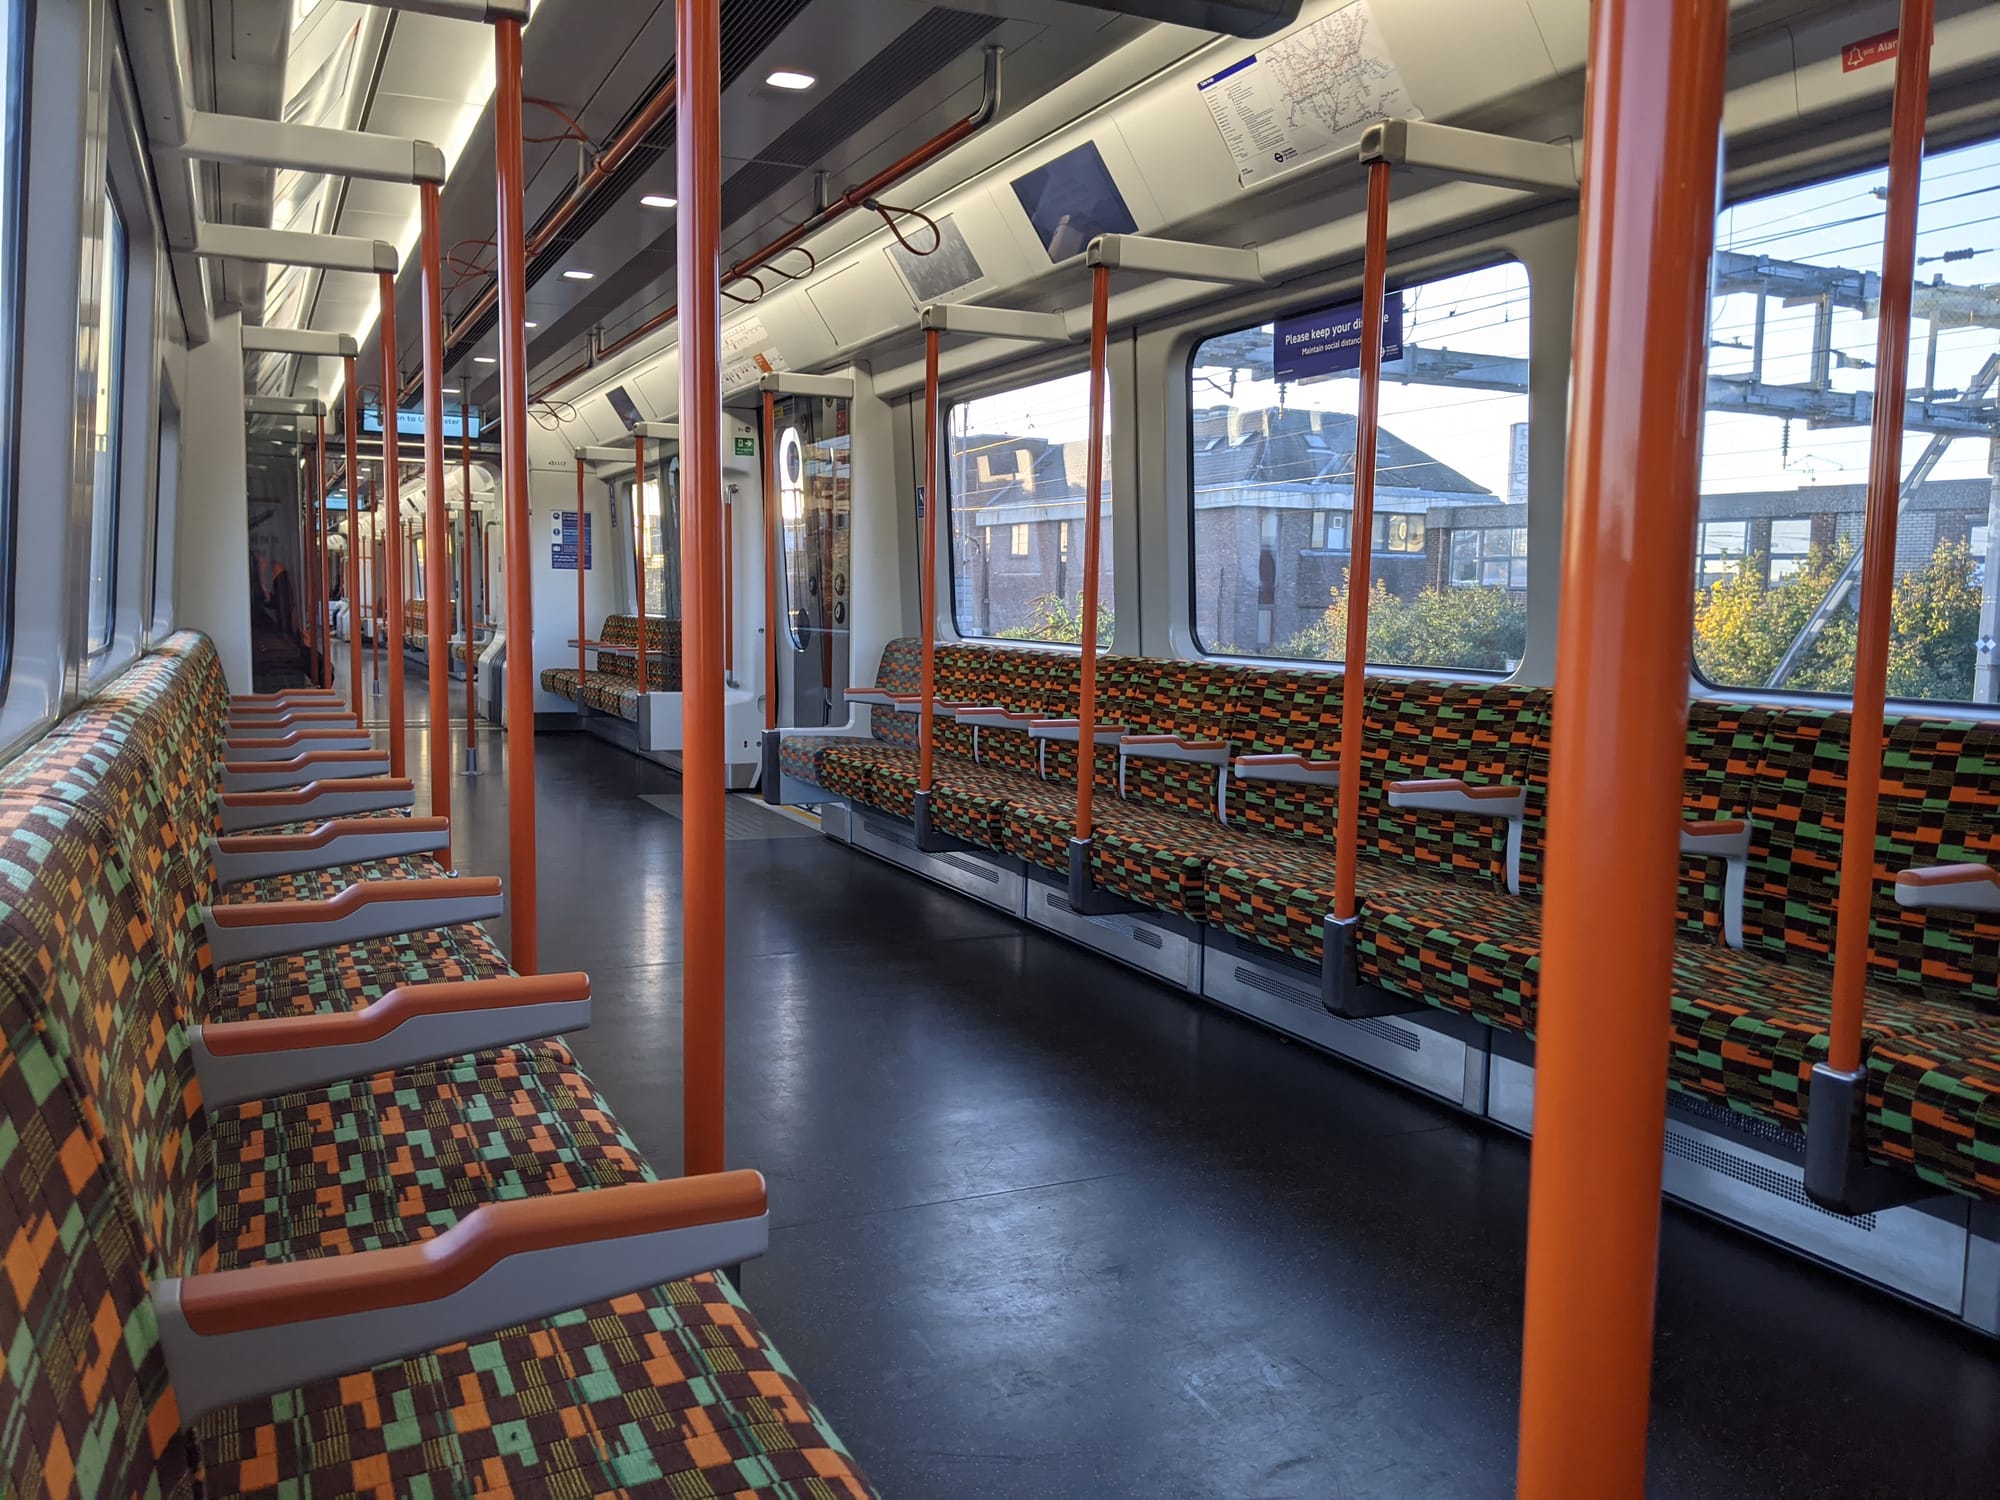 Seats are positioned along the outside of the carriage with a spacious walkway. There are bright orange handles and grab handles for standing passengers. The train is connected by continuous gangways, meaning there are no doors between carriages.